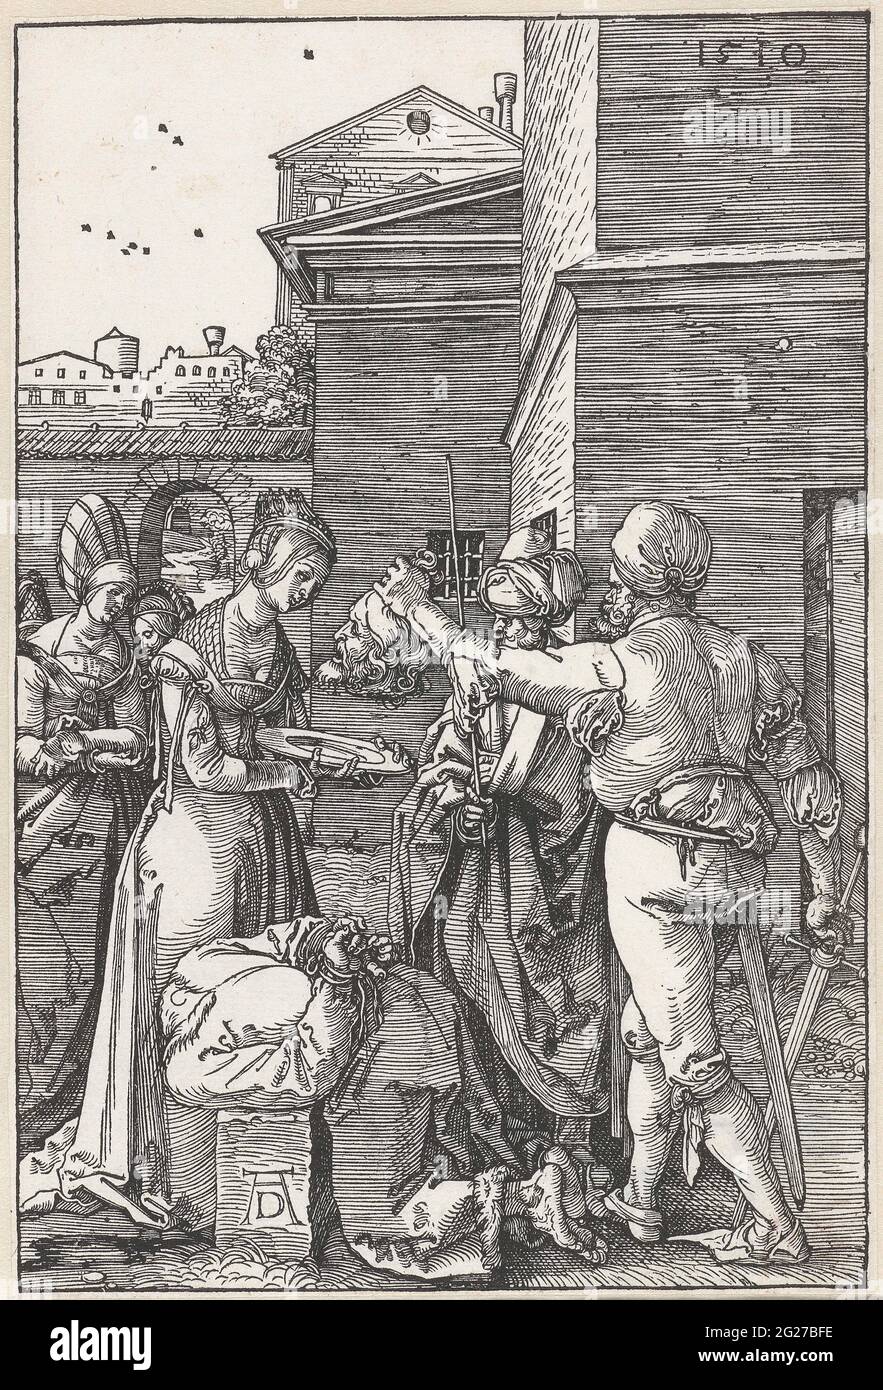 The beheading of John the Baptist. A ready man puts the head of John the Baptist on a scale that holds a woman (Salome). The beheading body of Johannes is on a block for her. Stock Photo